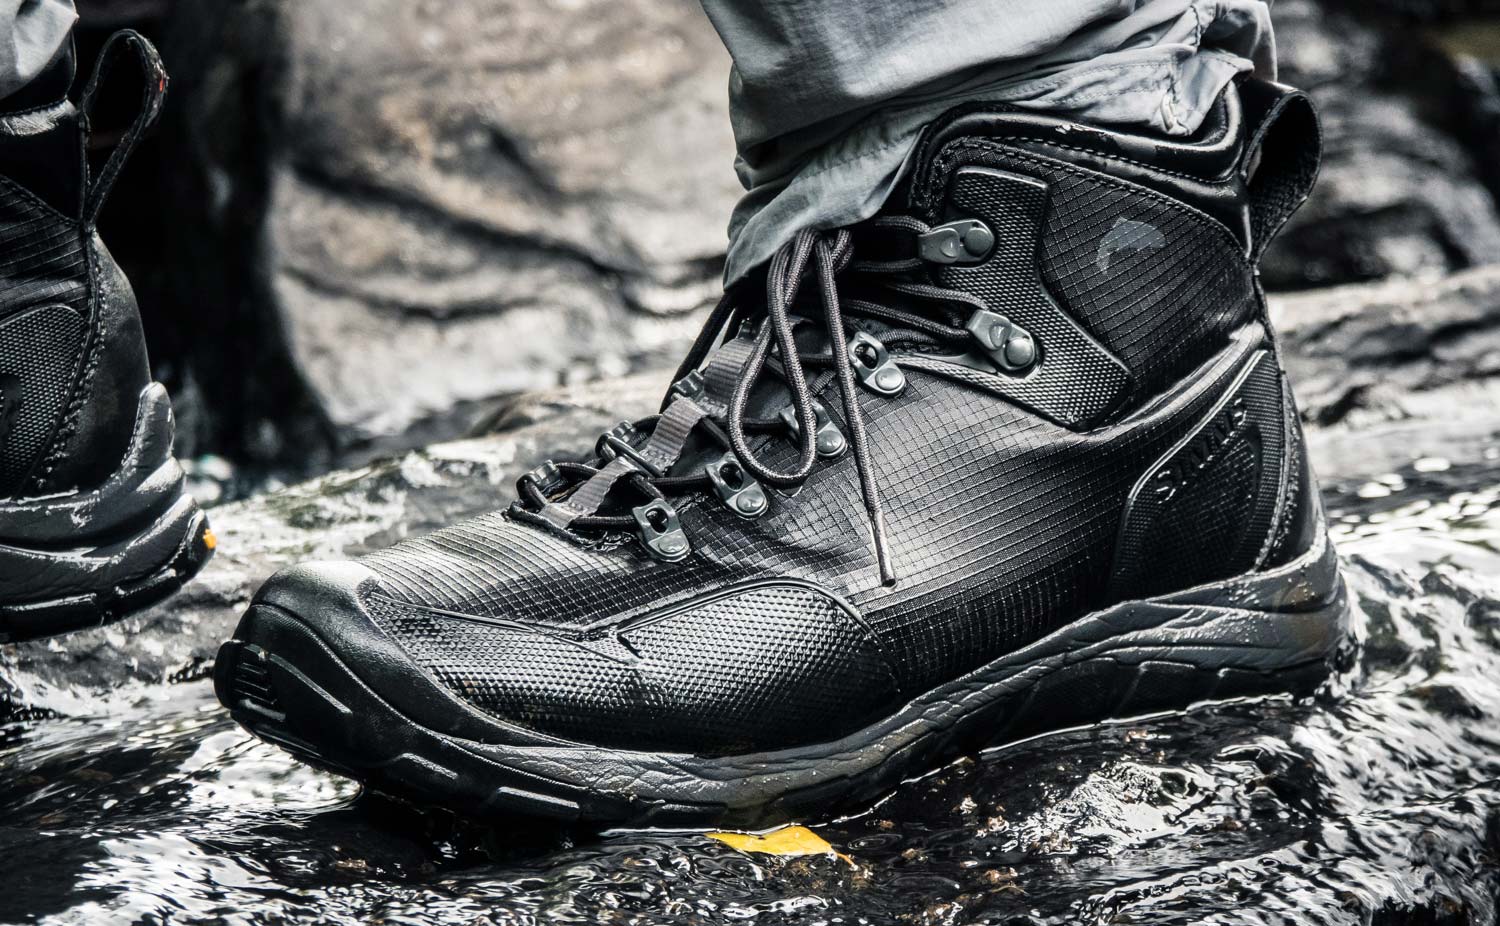 Simms Intruder Boot Review | Fly 